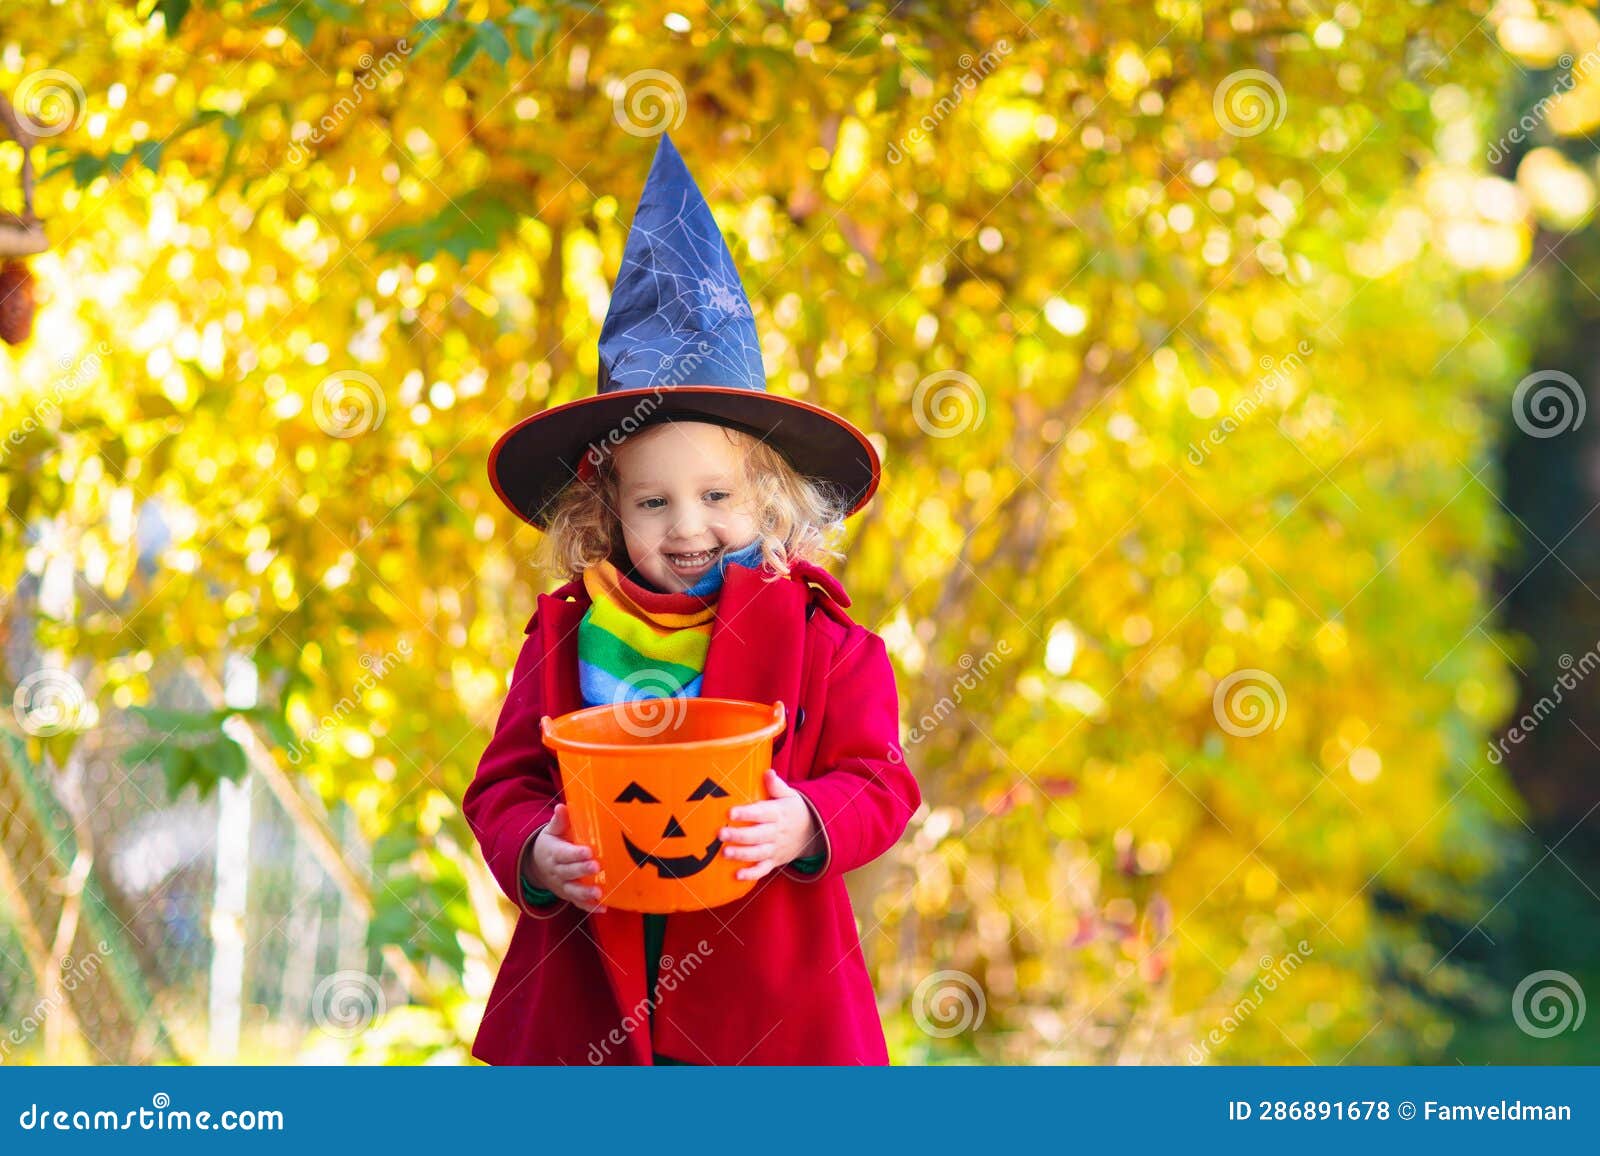 Kids Trick or Treat. Halloween Fun for Children Stock Photo - Image of ...